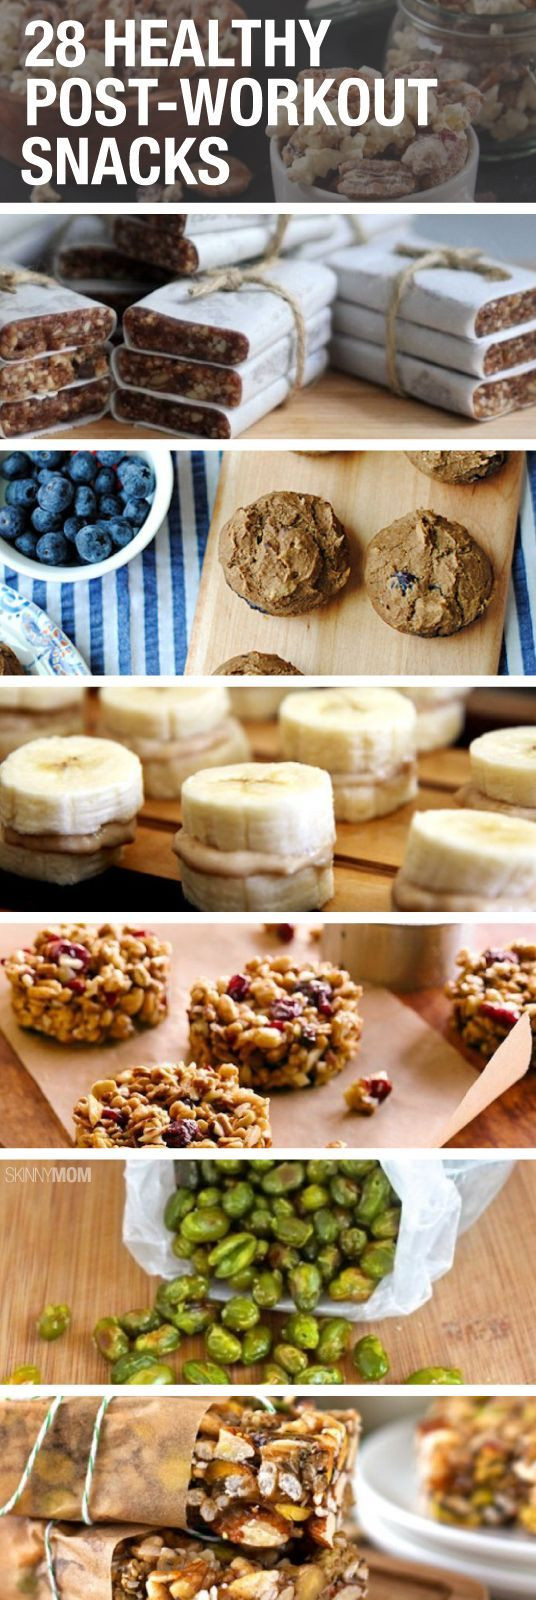 Healthy Workout Snacks
 269 best images about Blaire s Board on Pinterest